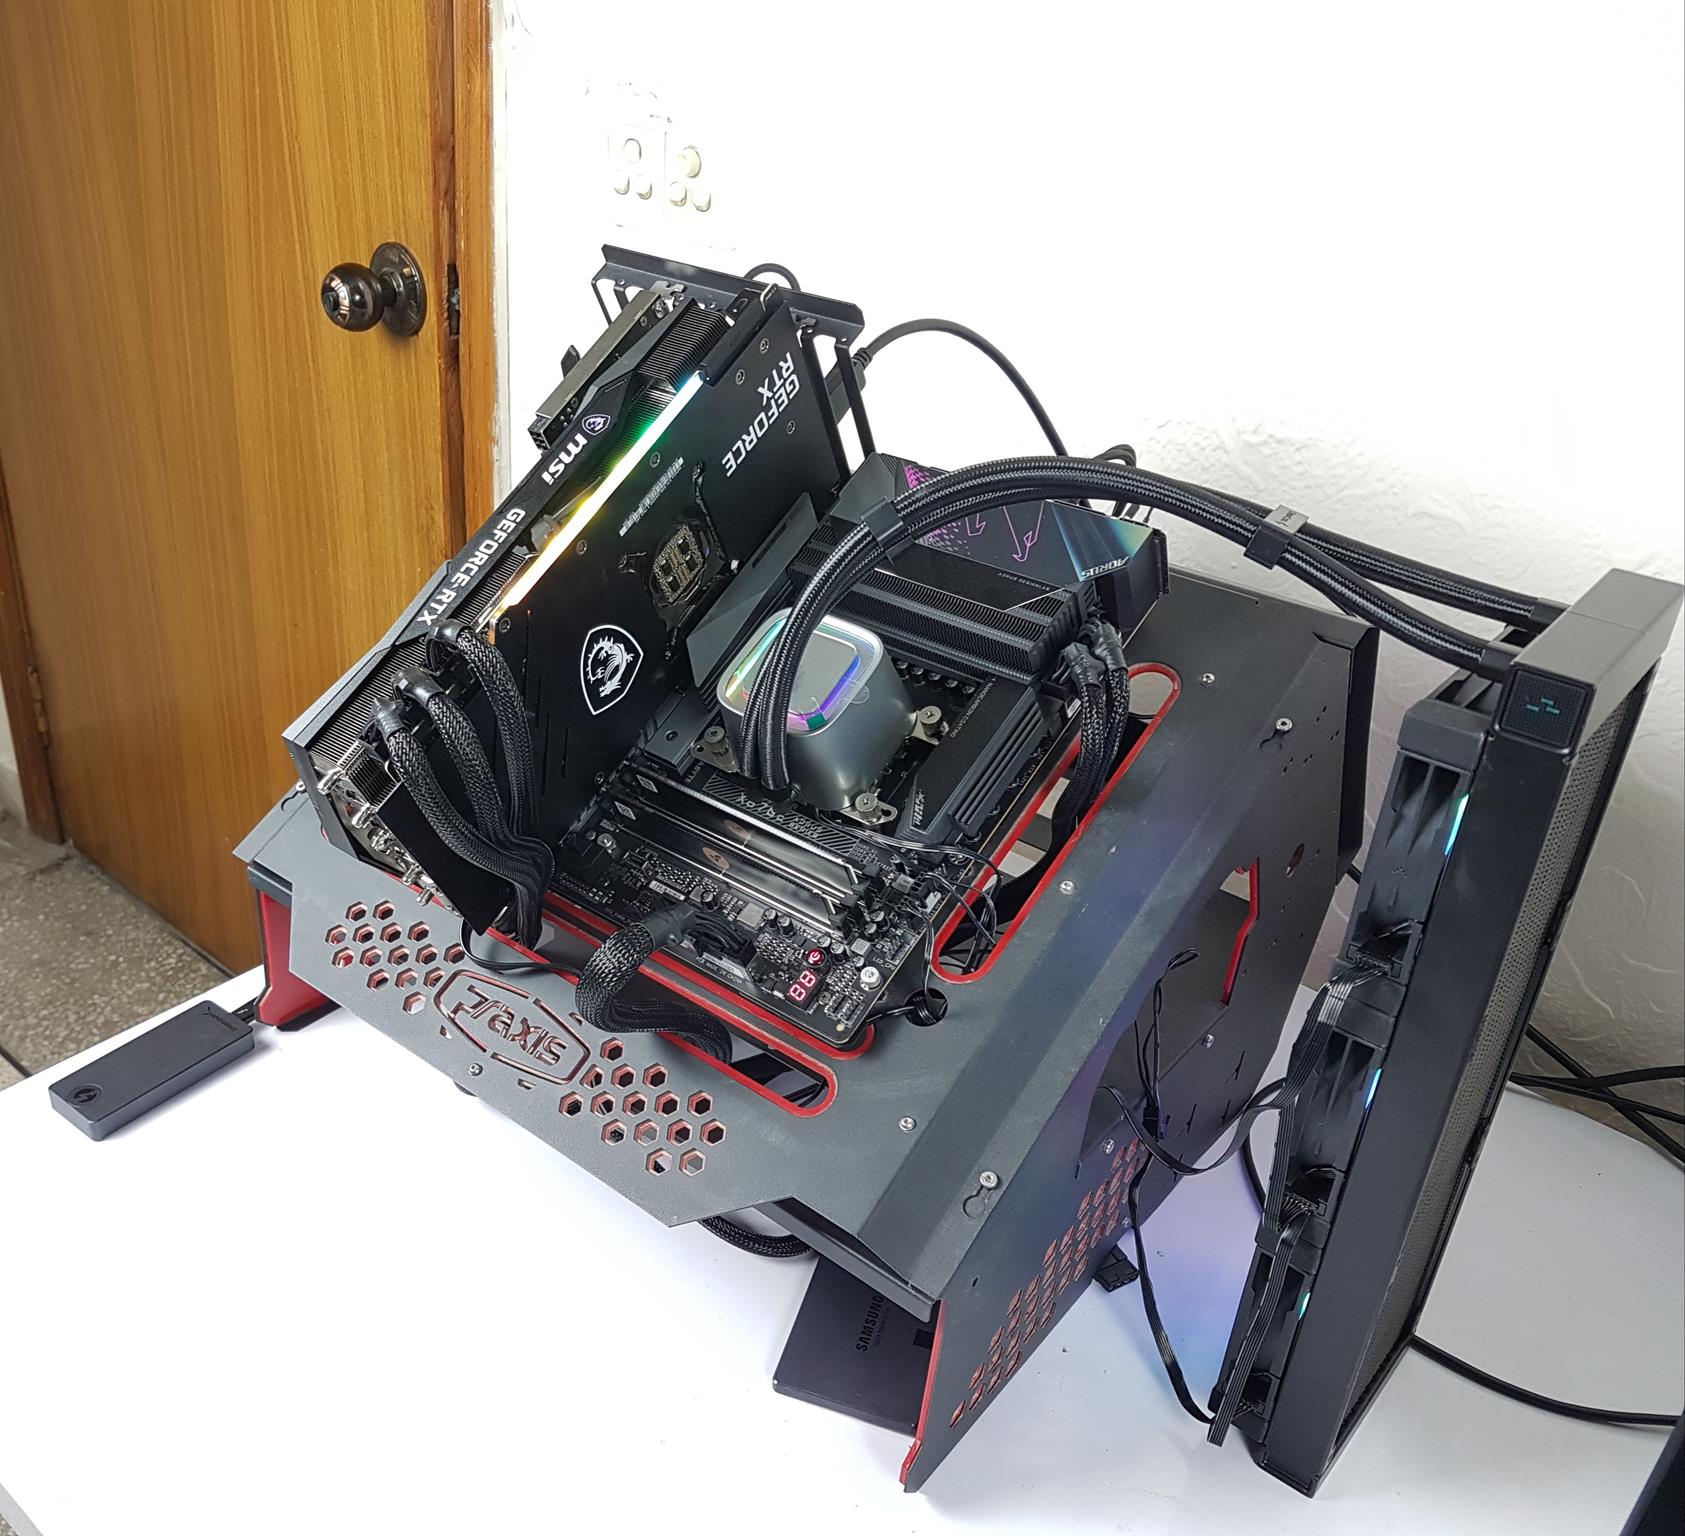 Here is our X670E Test Bench.